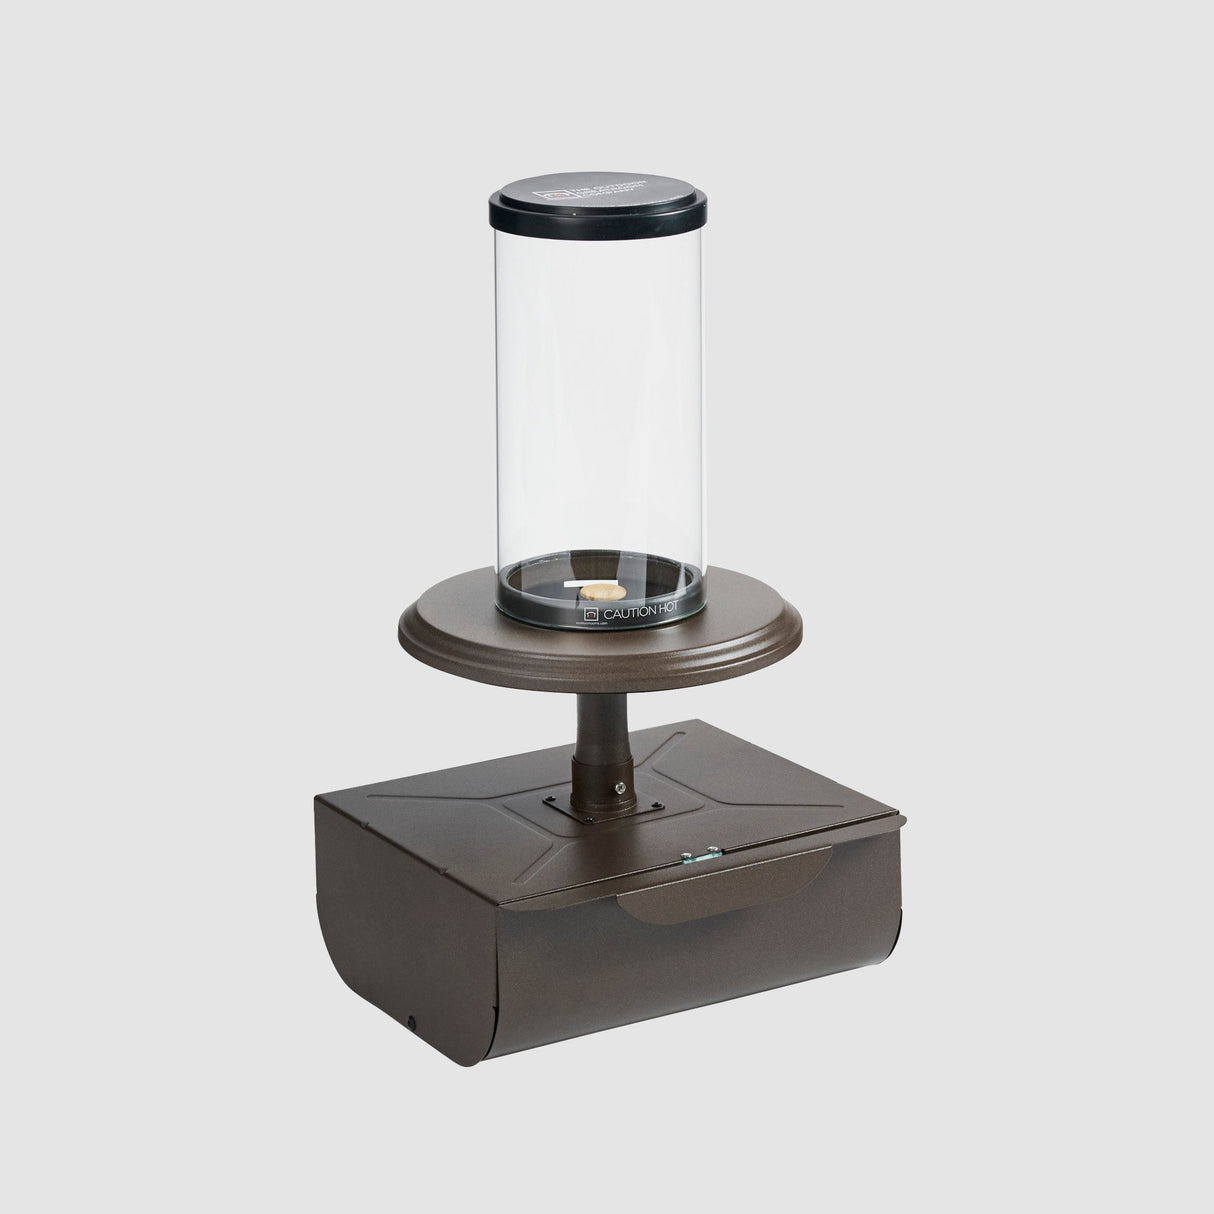 The Intrigue Table Top Outdoor Lantern on a grey background